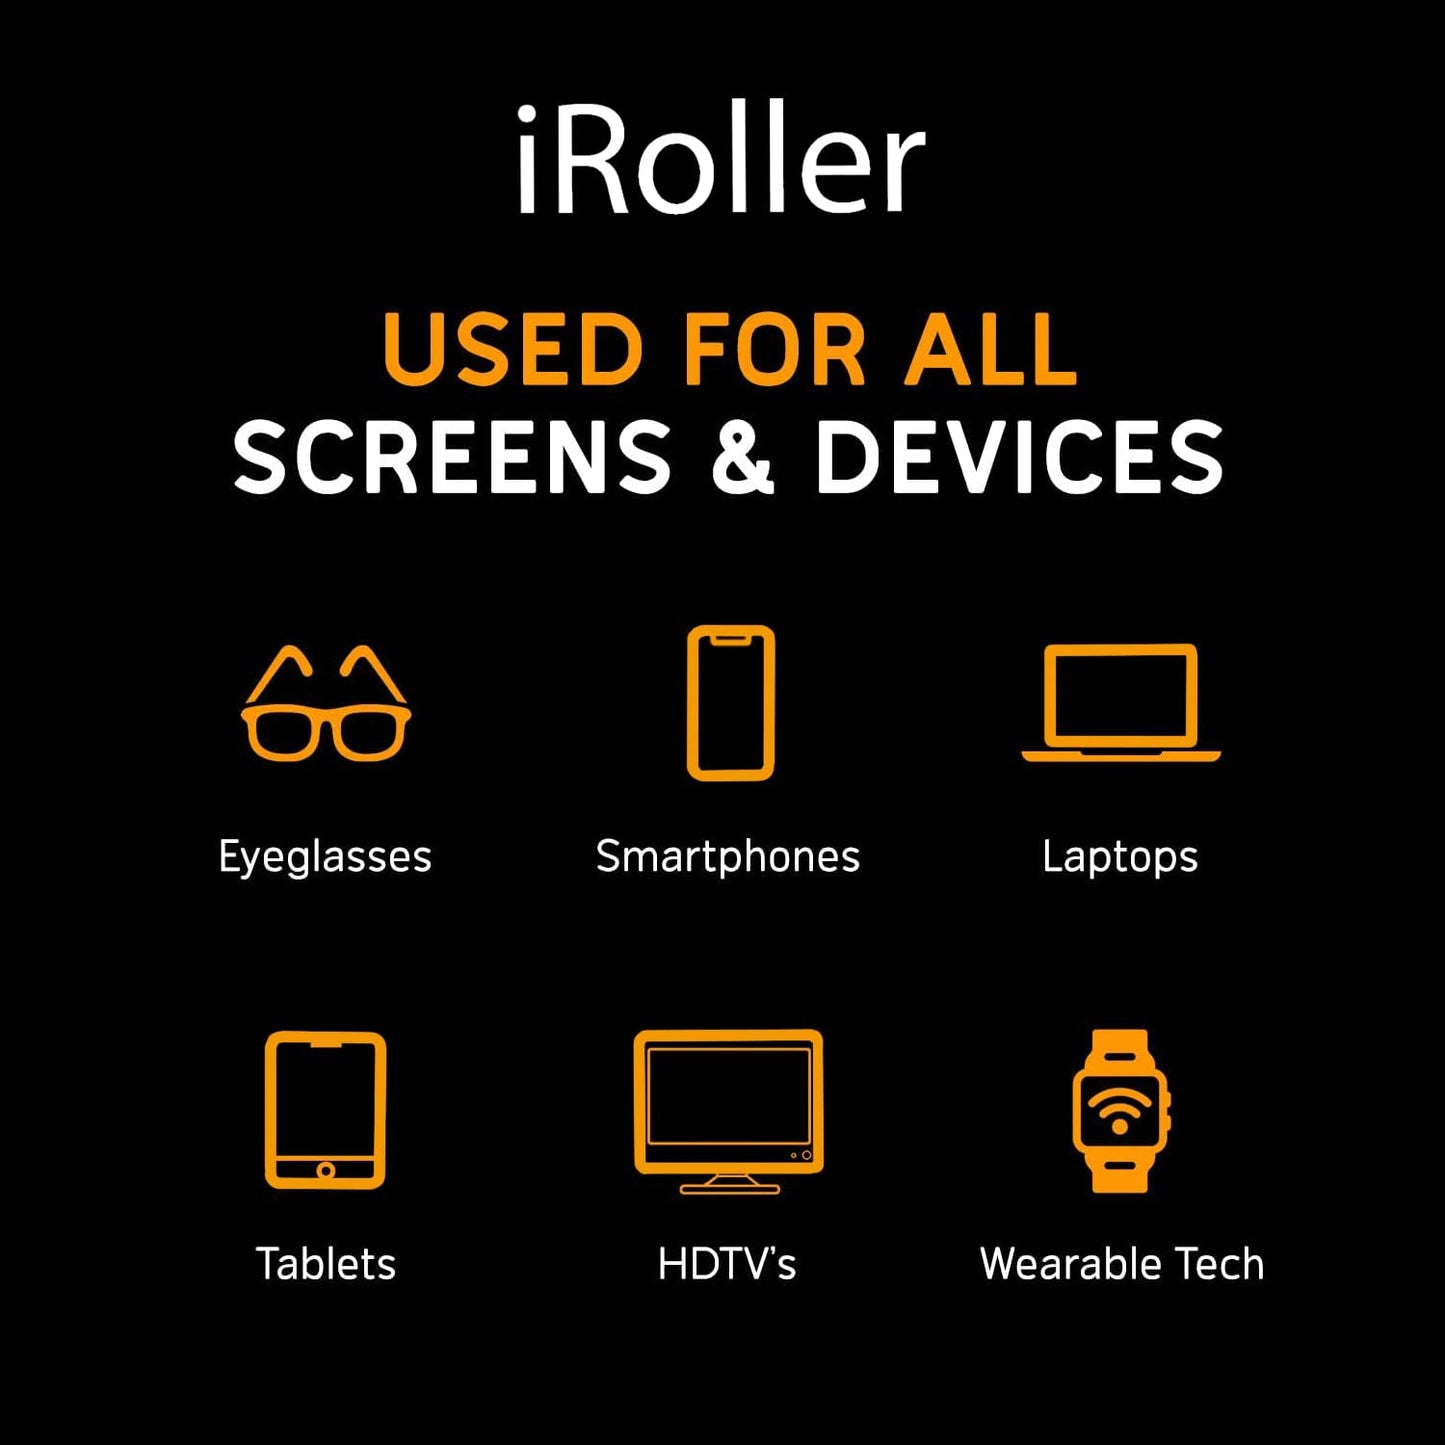 iRoller Premium Screen Cleaner, Reusable Non-Liquid, Non-Chemical Phone Cleaning Roller for iPhone, iPad, Laptop, MacBook, Computer Monitors, TV & Smartphones - No Wipes, Cloth or Spray Required